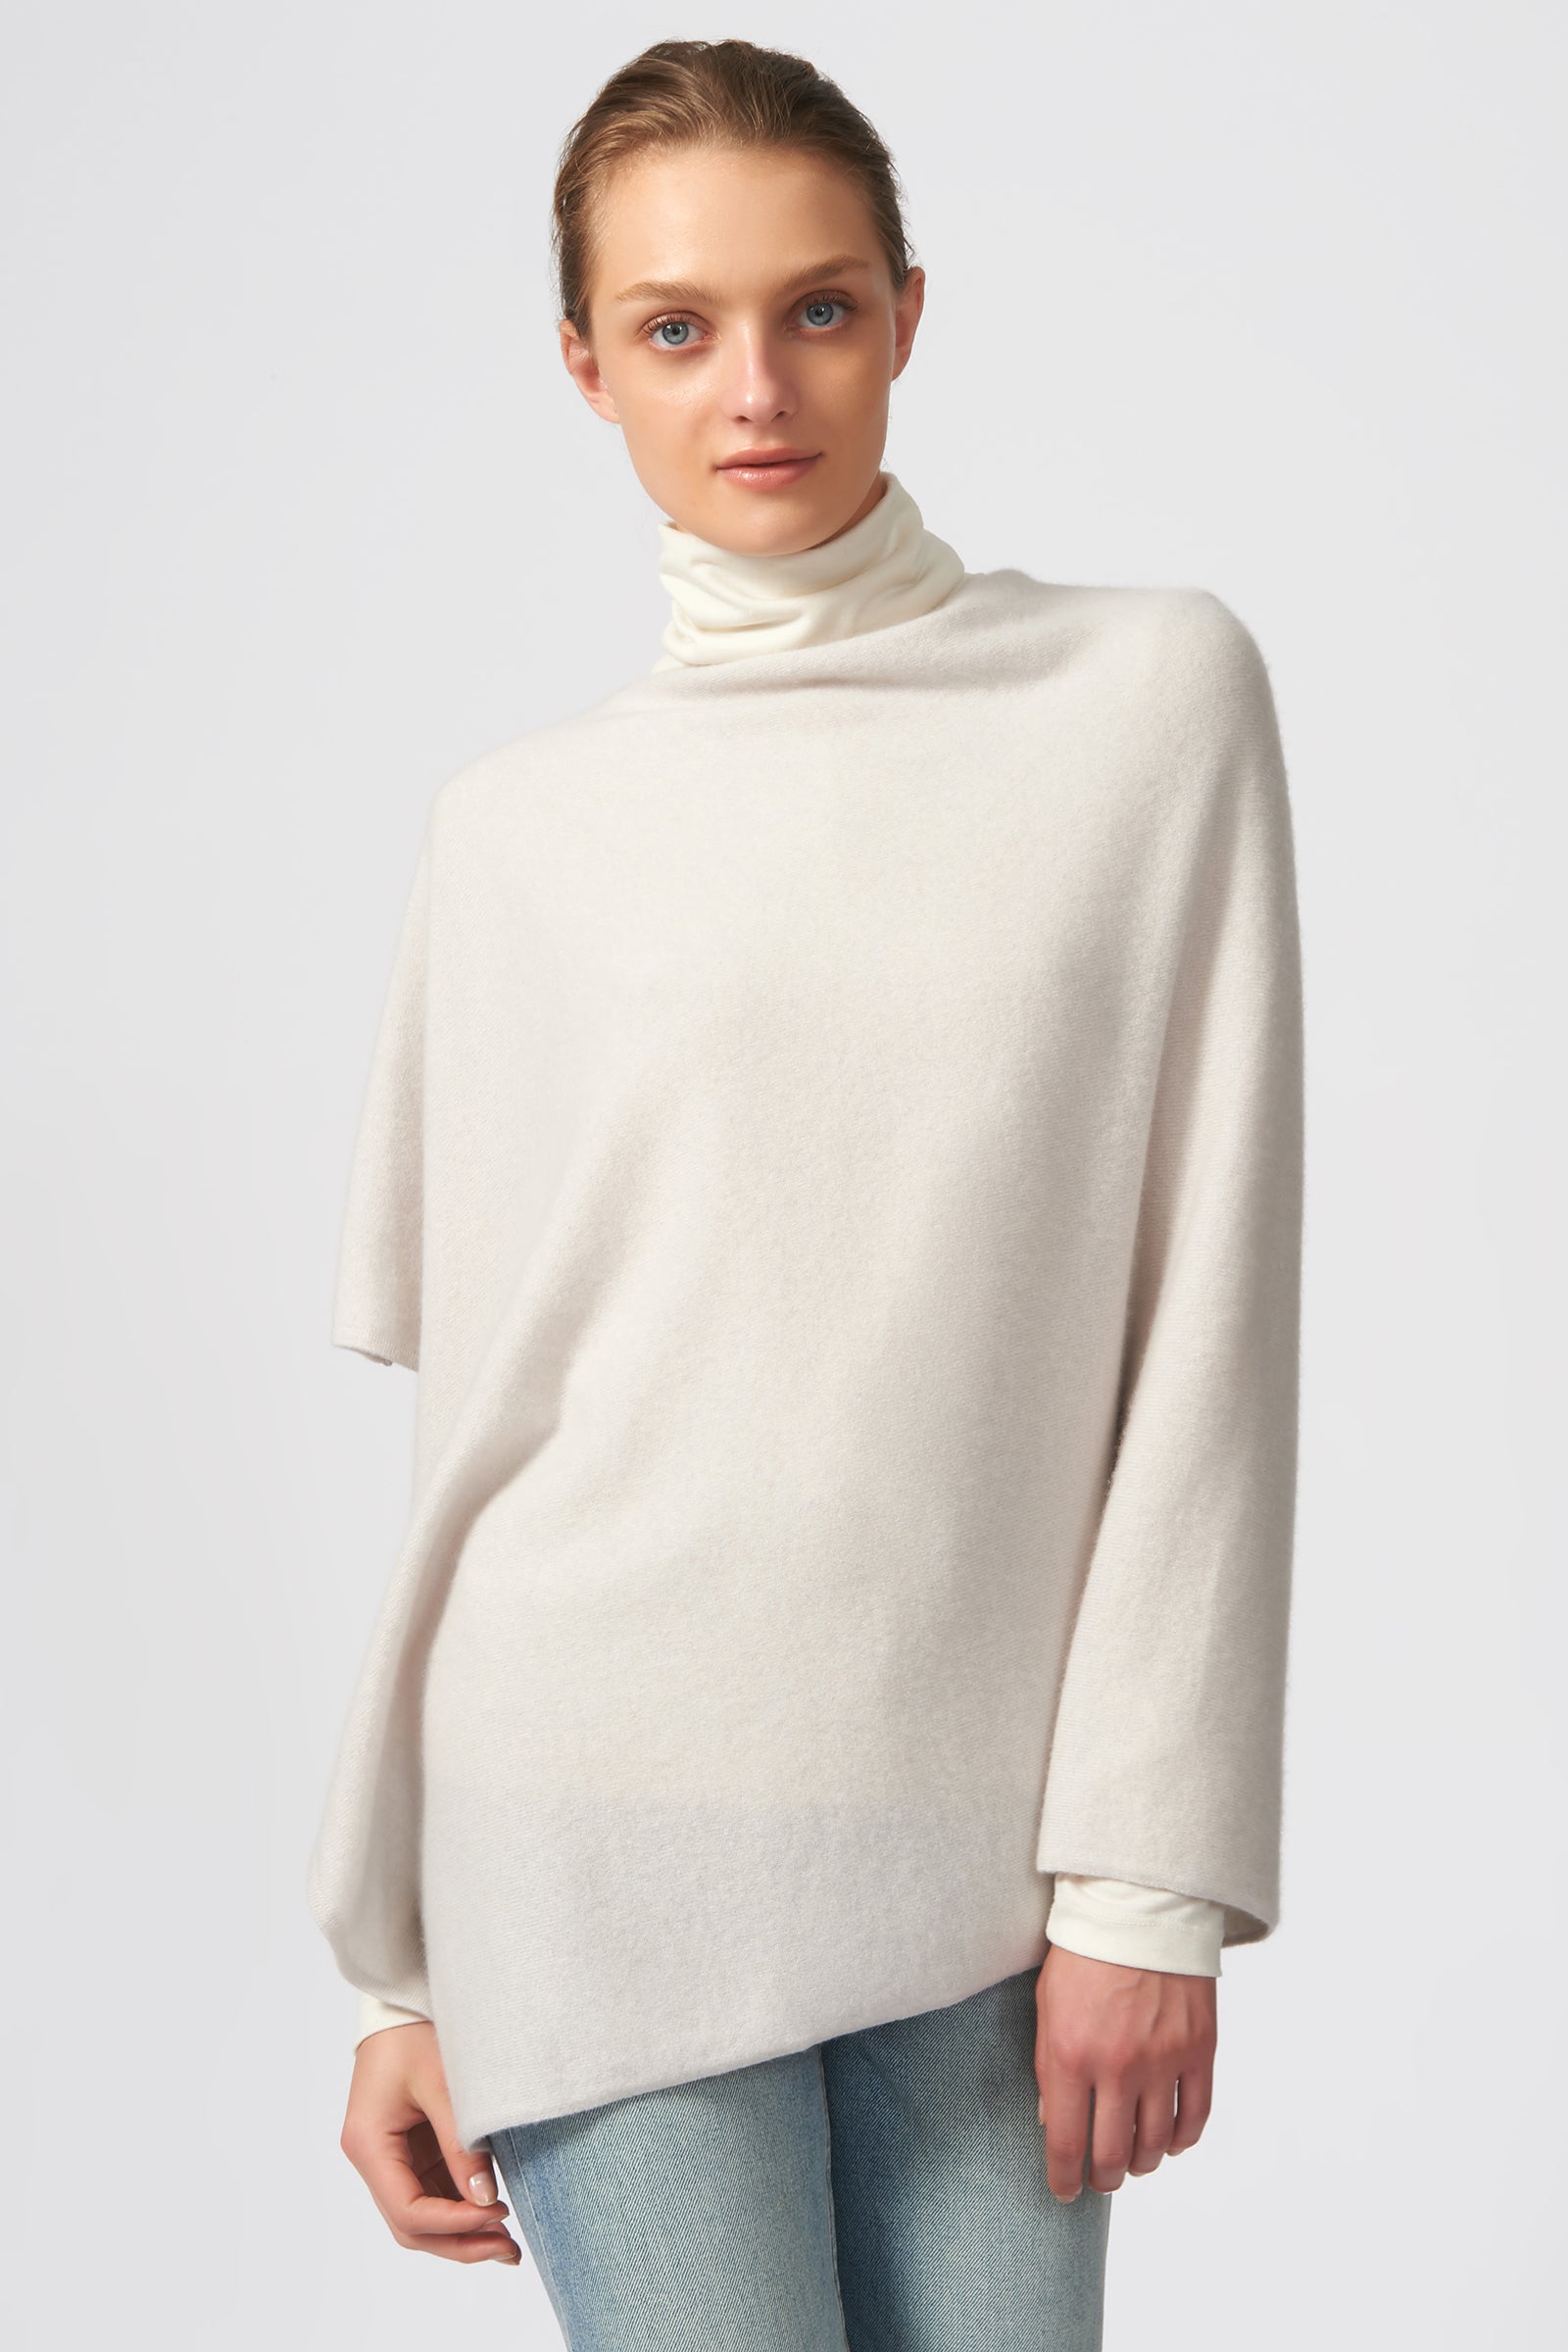 Kal Rieman Cashmere Poncho in Haze on Model Front View